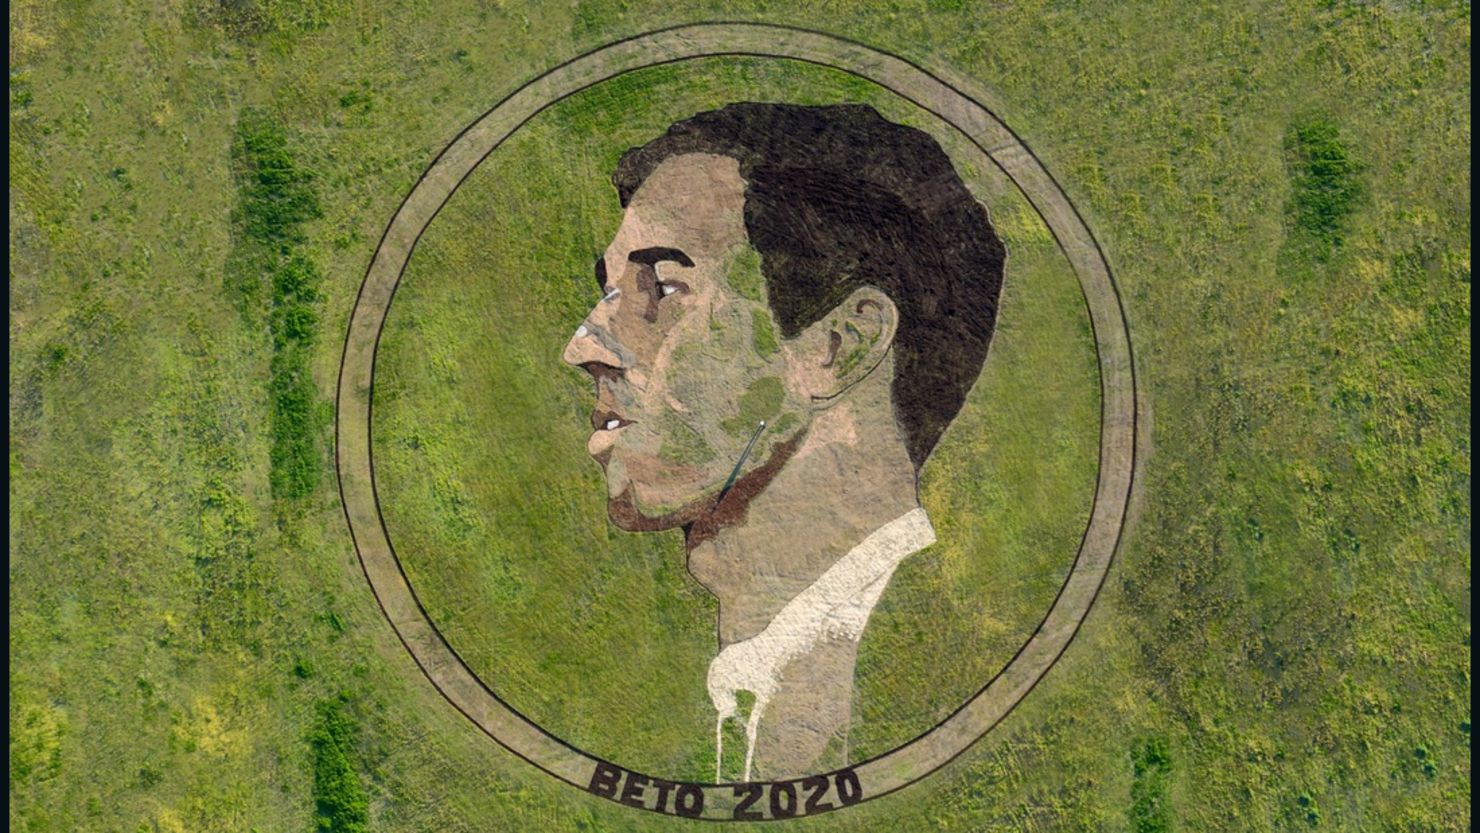 The 2-acre wide crop circle of Democratic presidential hopeful Beto O'Rourke, located close to Austin-Bergstrom International Airport.